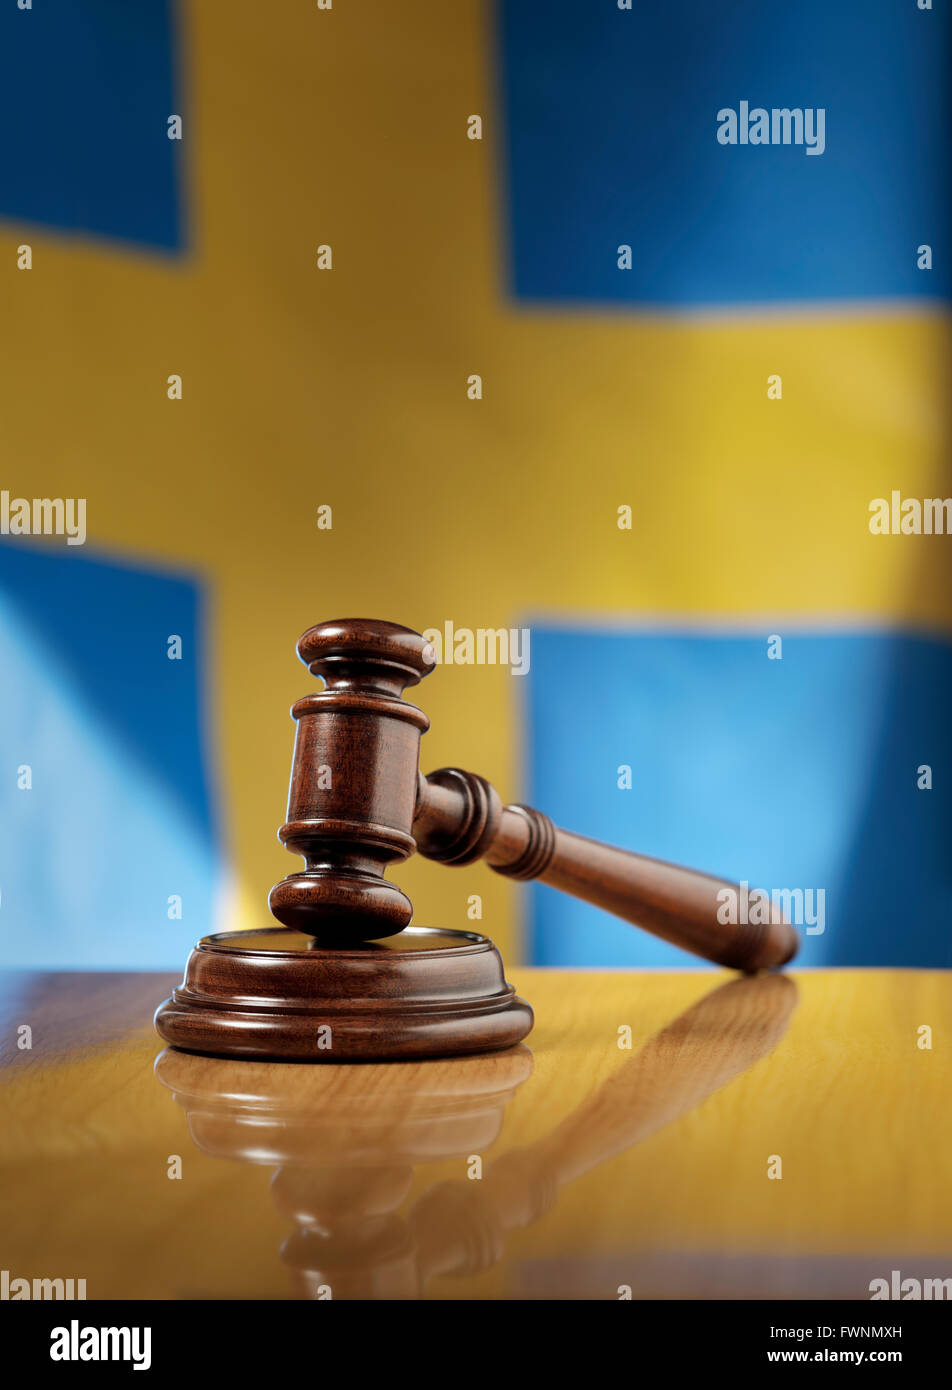 Mahogany wooden gavel on glossy wooden table, flag of Sweden in the background. Stock Photo